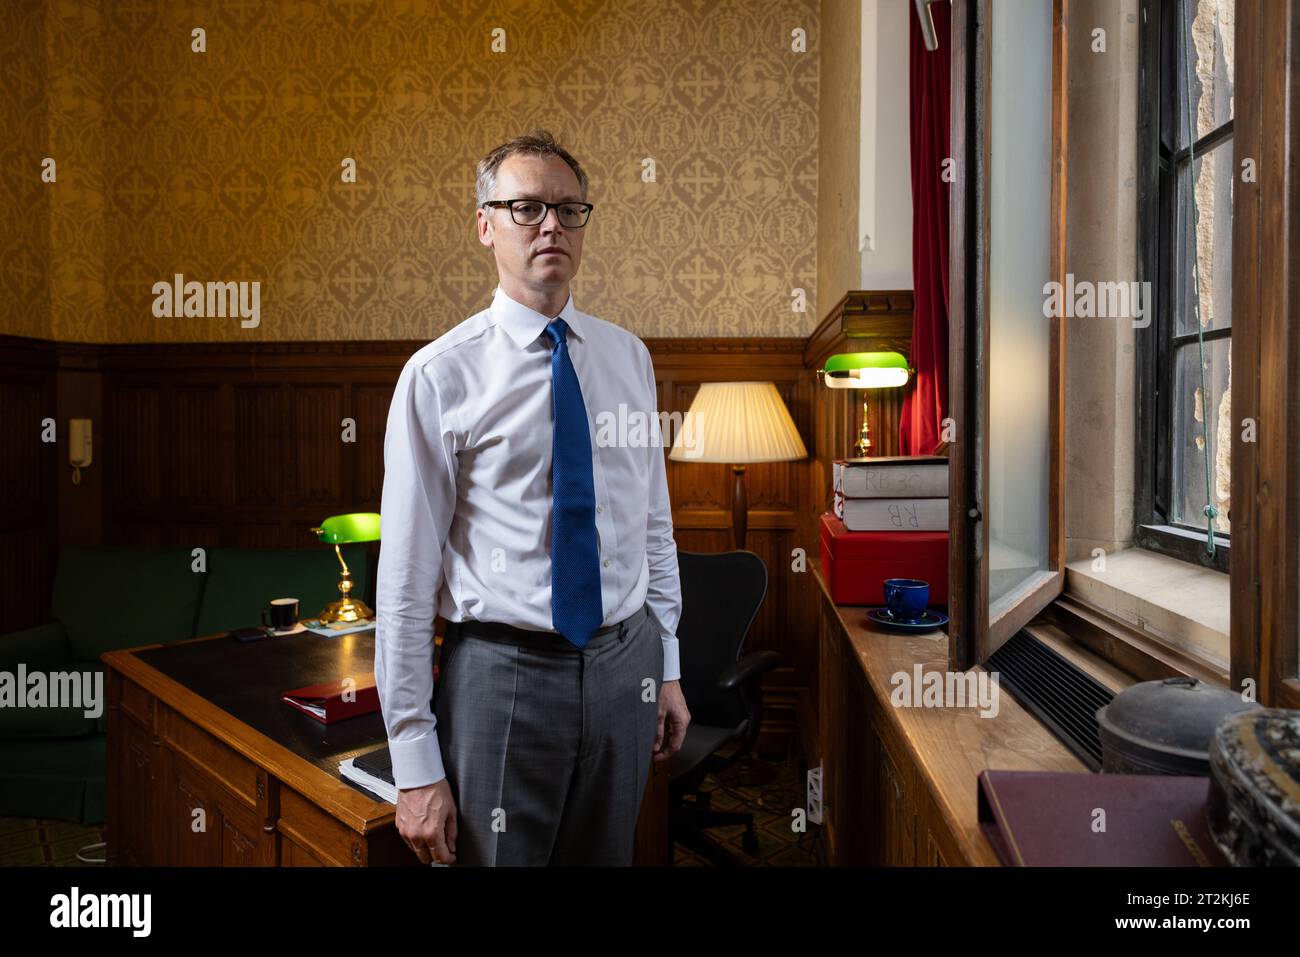 Michael Tomlinson, the Solicitor General, whose younger brother Edward was killed by carbon monoxide poisoning, Houses of Parliament, Westminster, UK Stock Photo